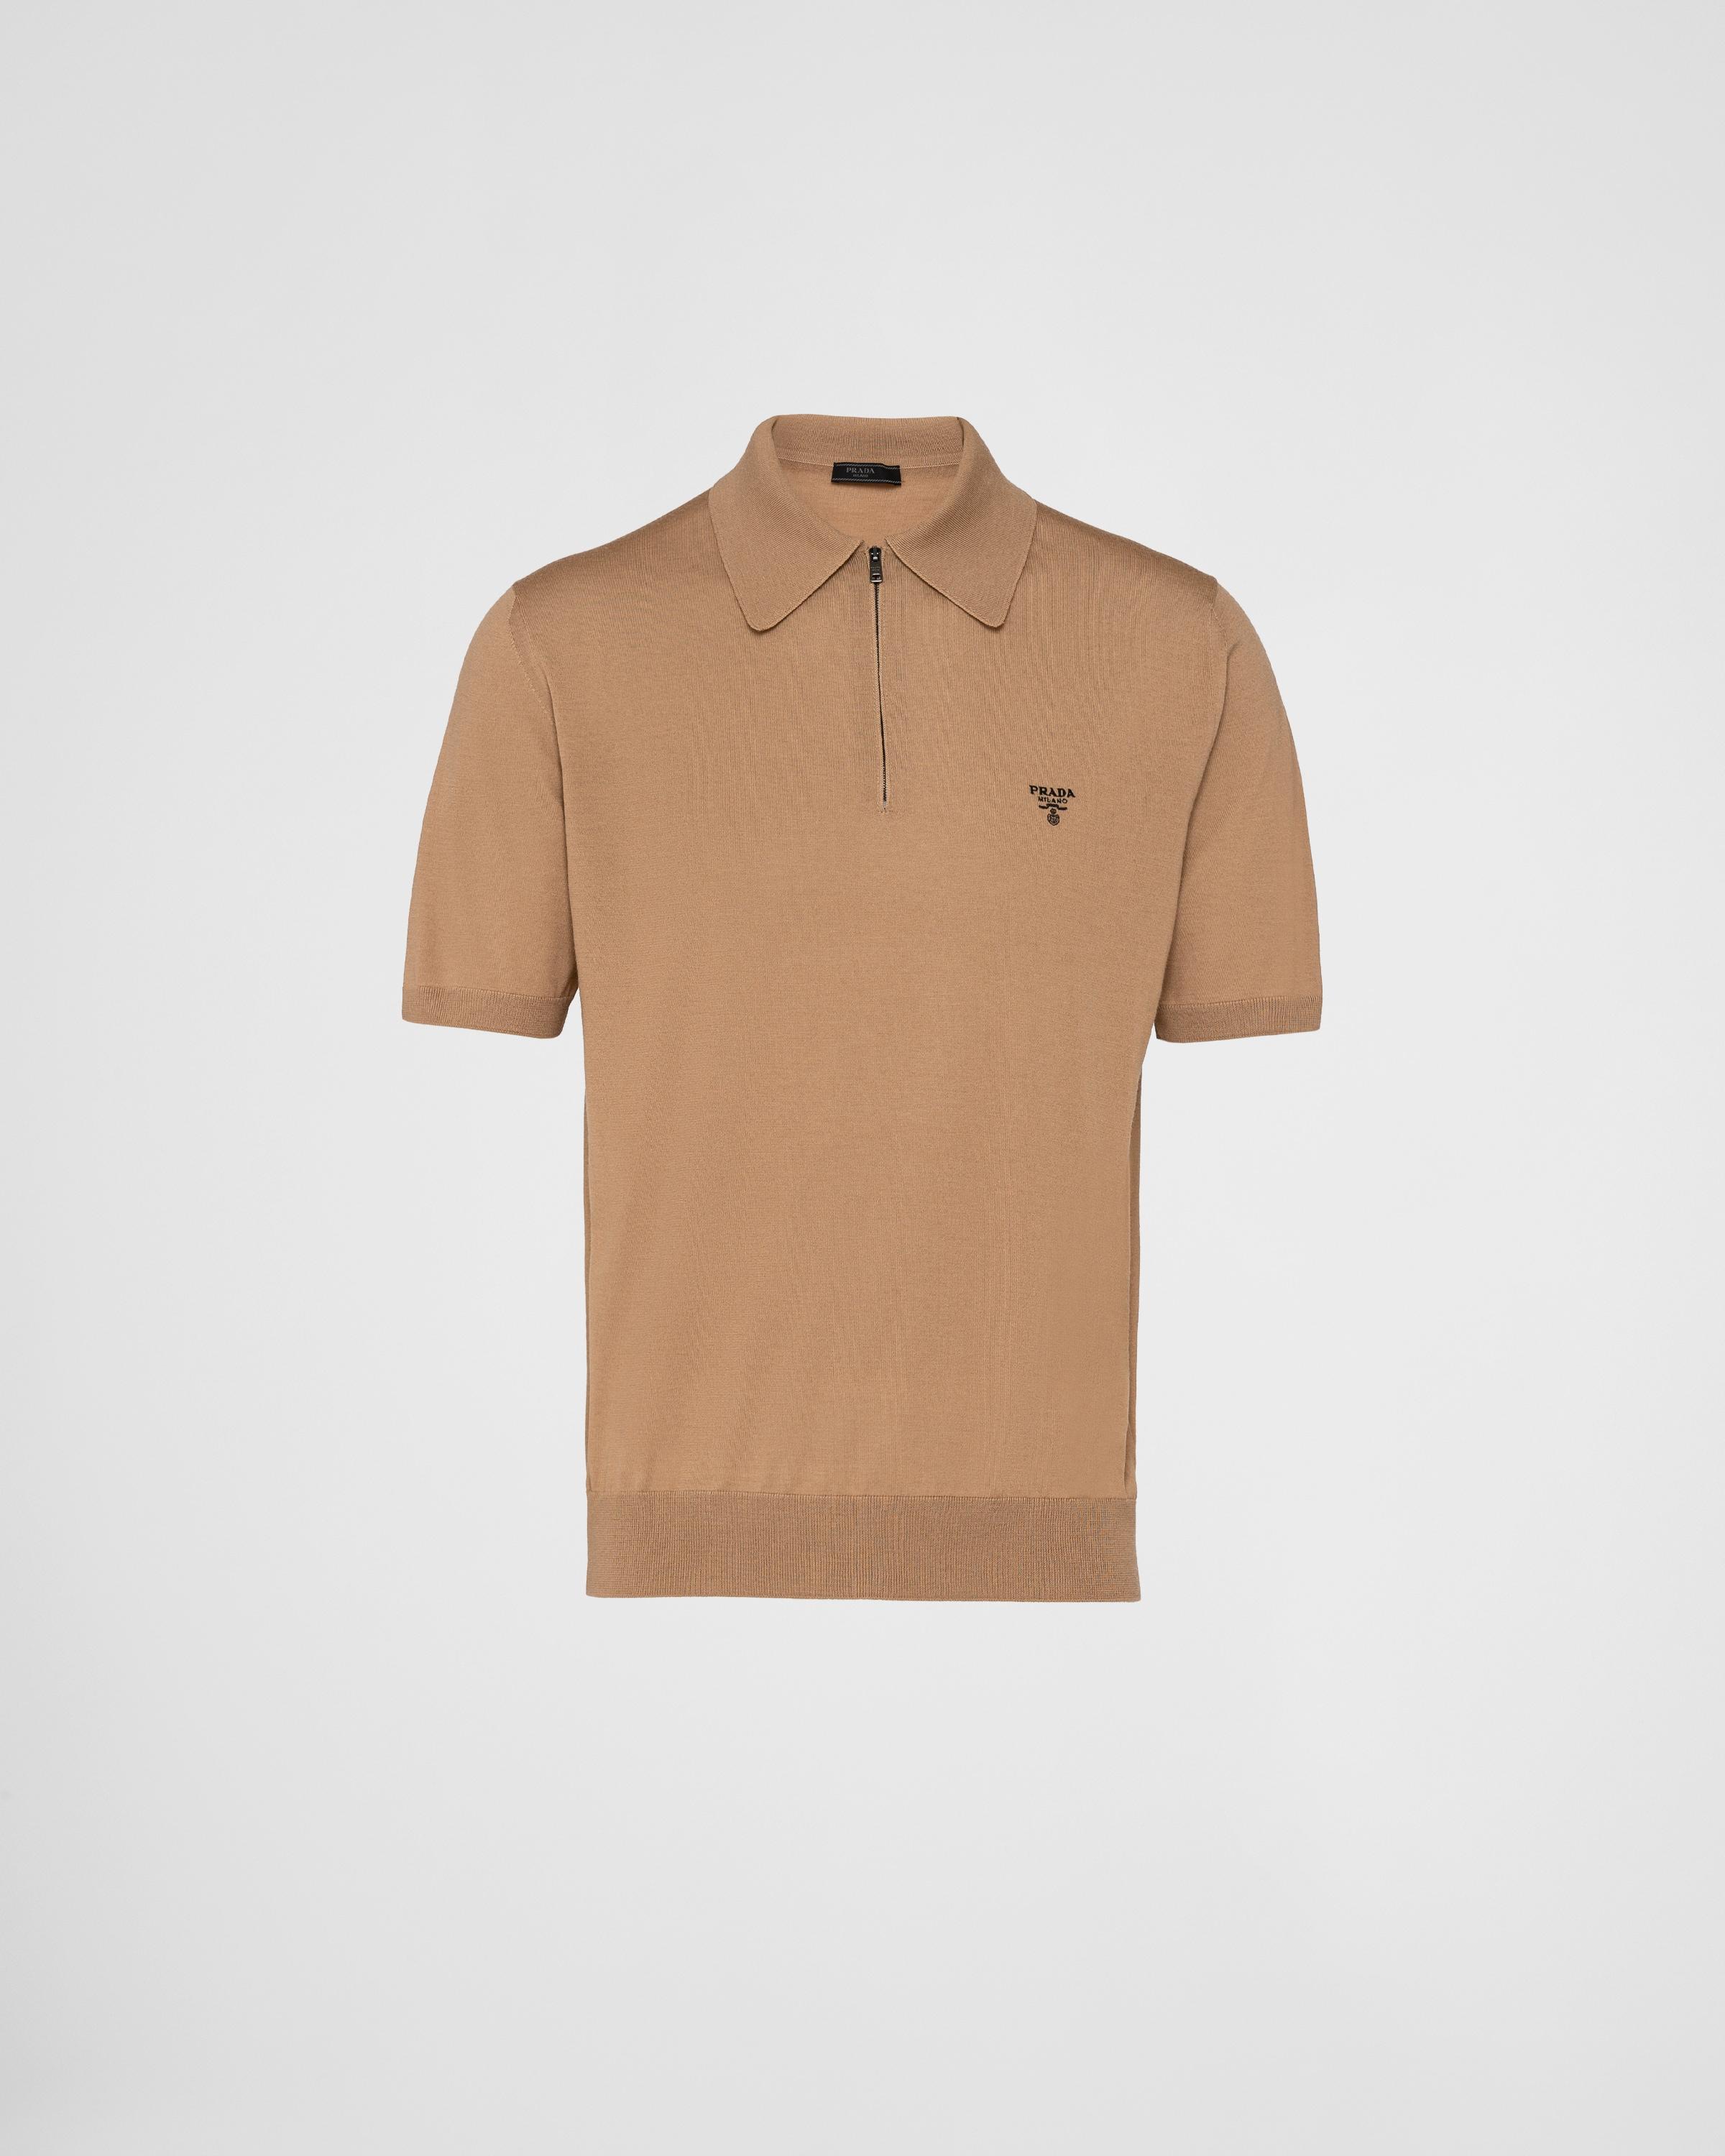 Prada Superfine Wool Polo Shirt in Natural for Men | Lyst